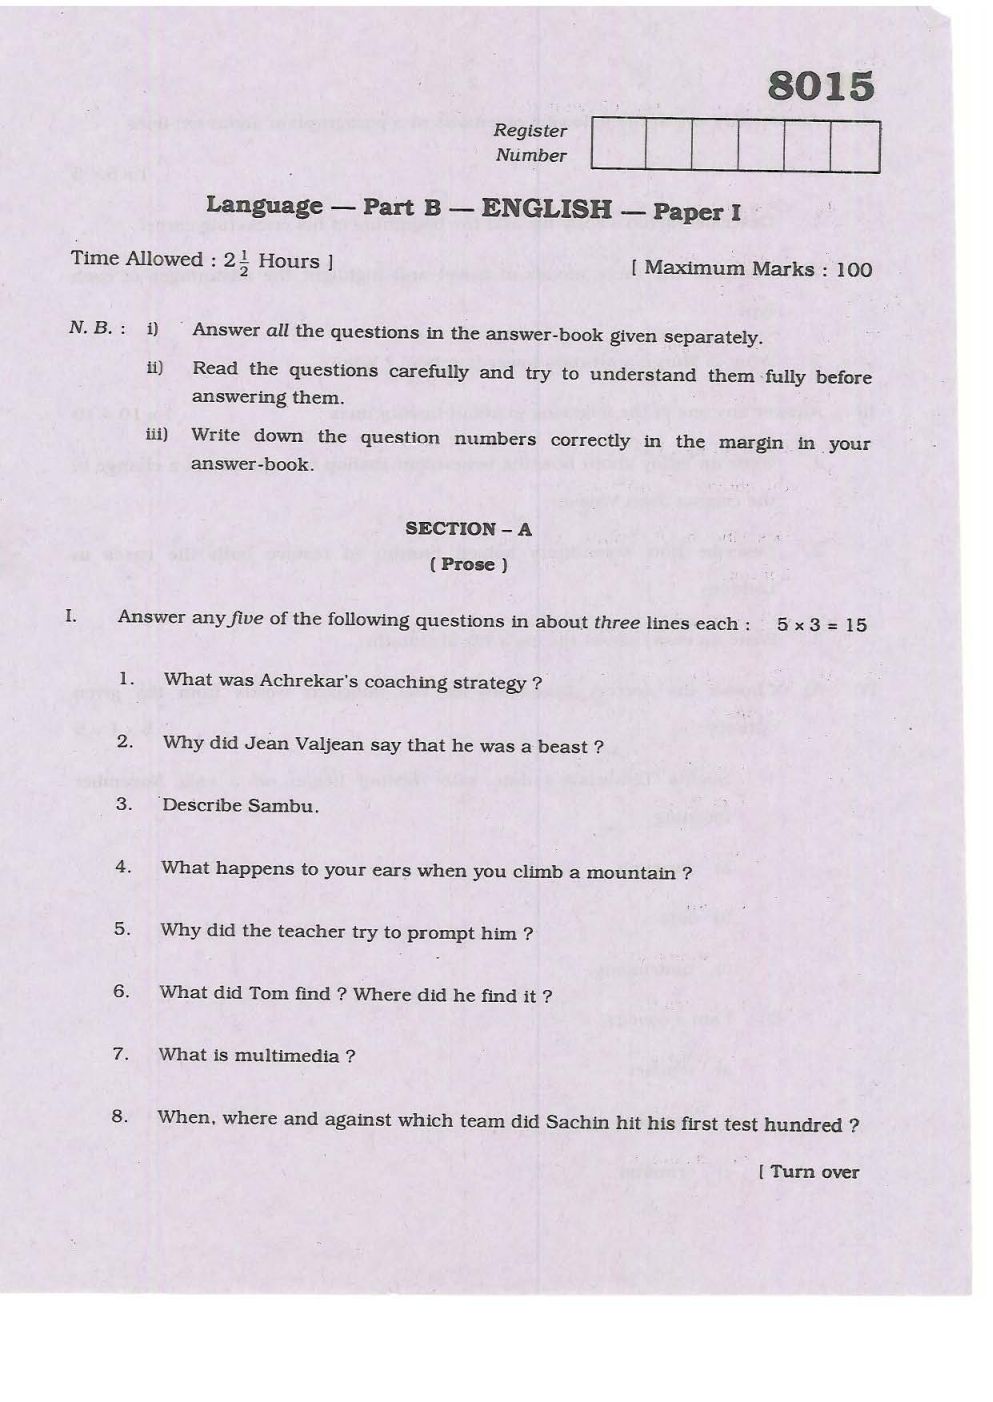 12th maths assignment answers 2021 pdf